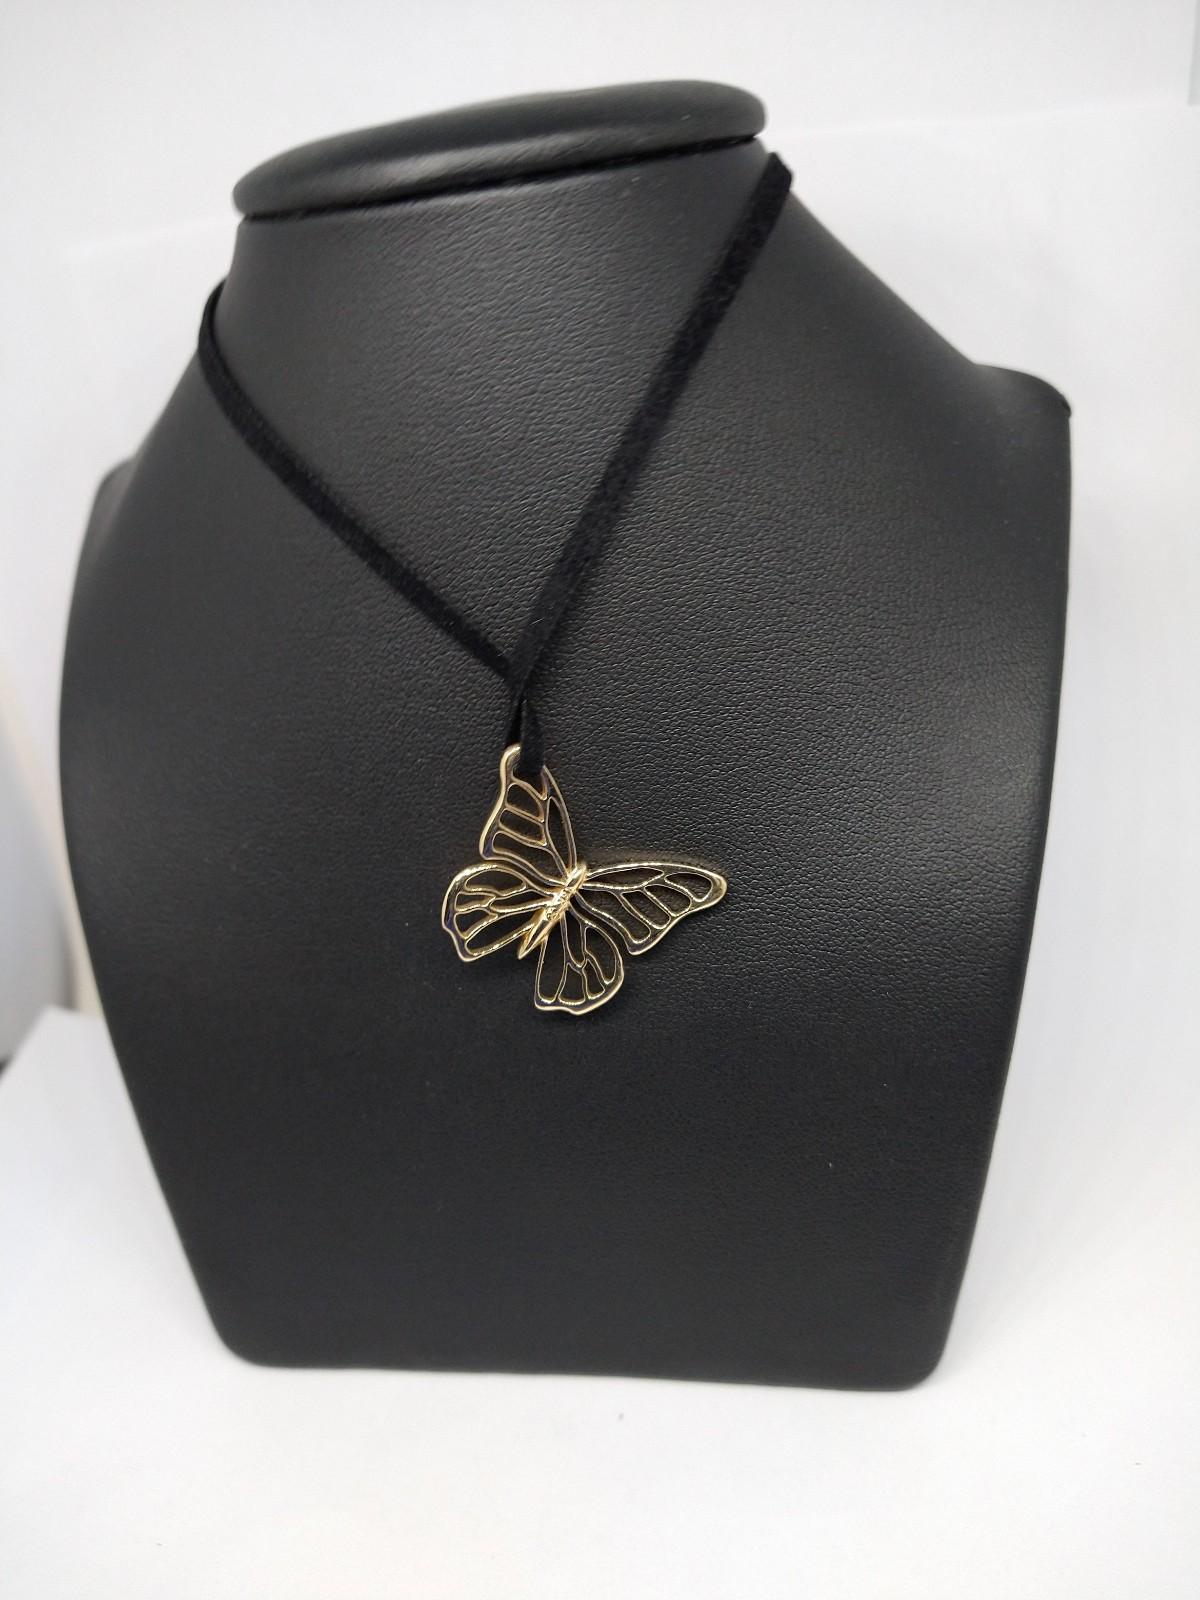 14 Karat Yellow Gold Monarch Butterfly Pendant Necklace For Sale 3